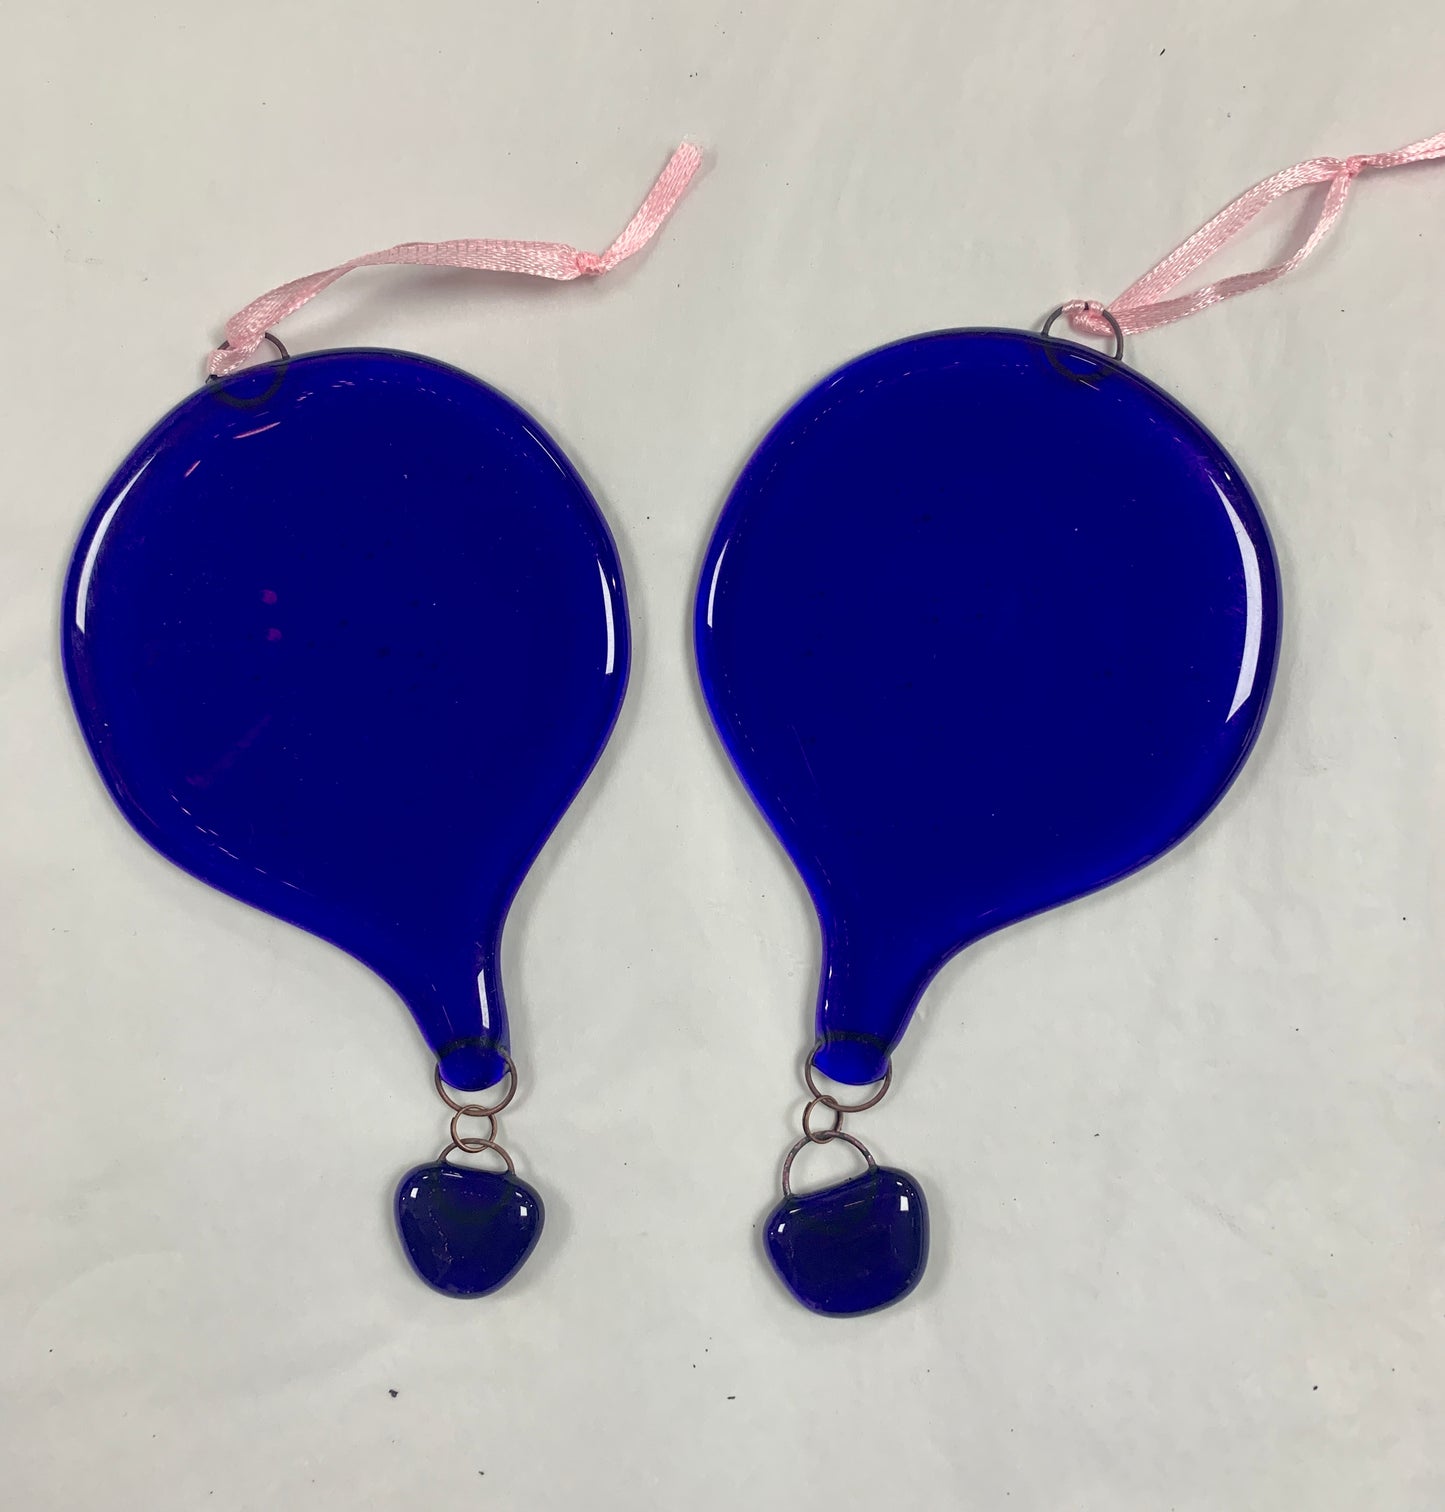 A Bristol Blue solid colour Fused glass Hot air balloon. A decorative glass hanging.